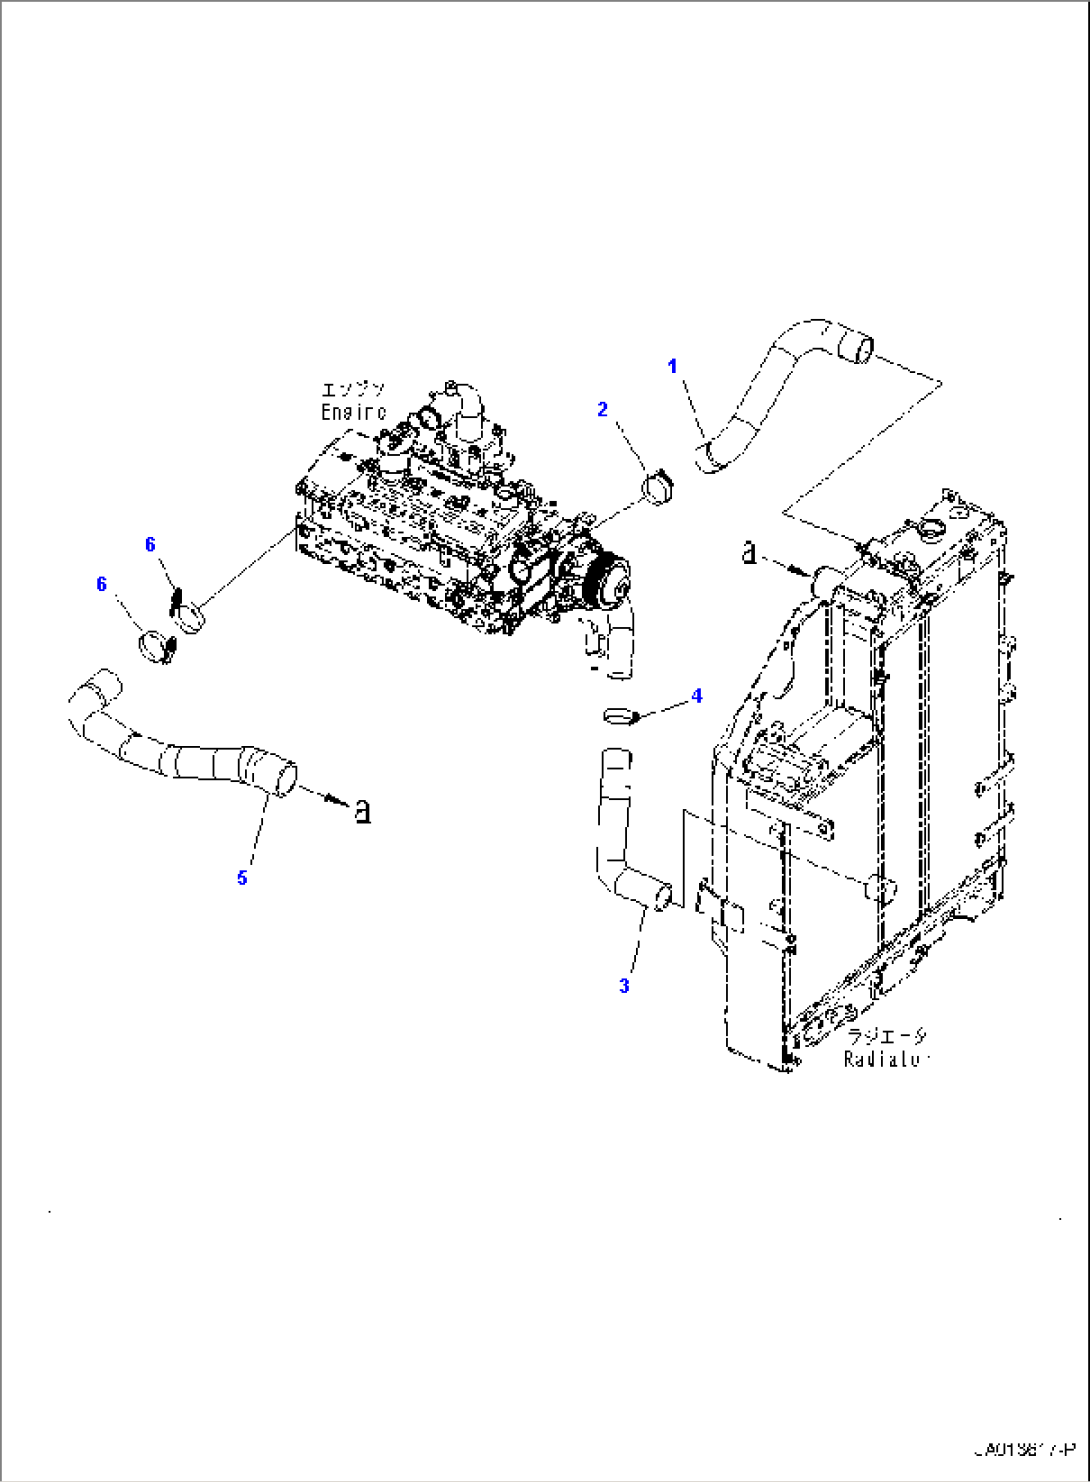 COOLING SYSTEM, WITH RADIATOR PROTECTIVE NET, ENGINE PIPING